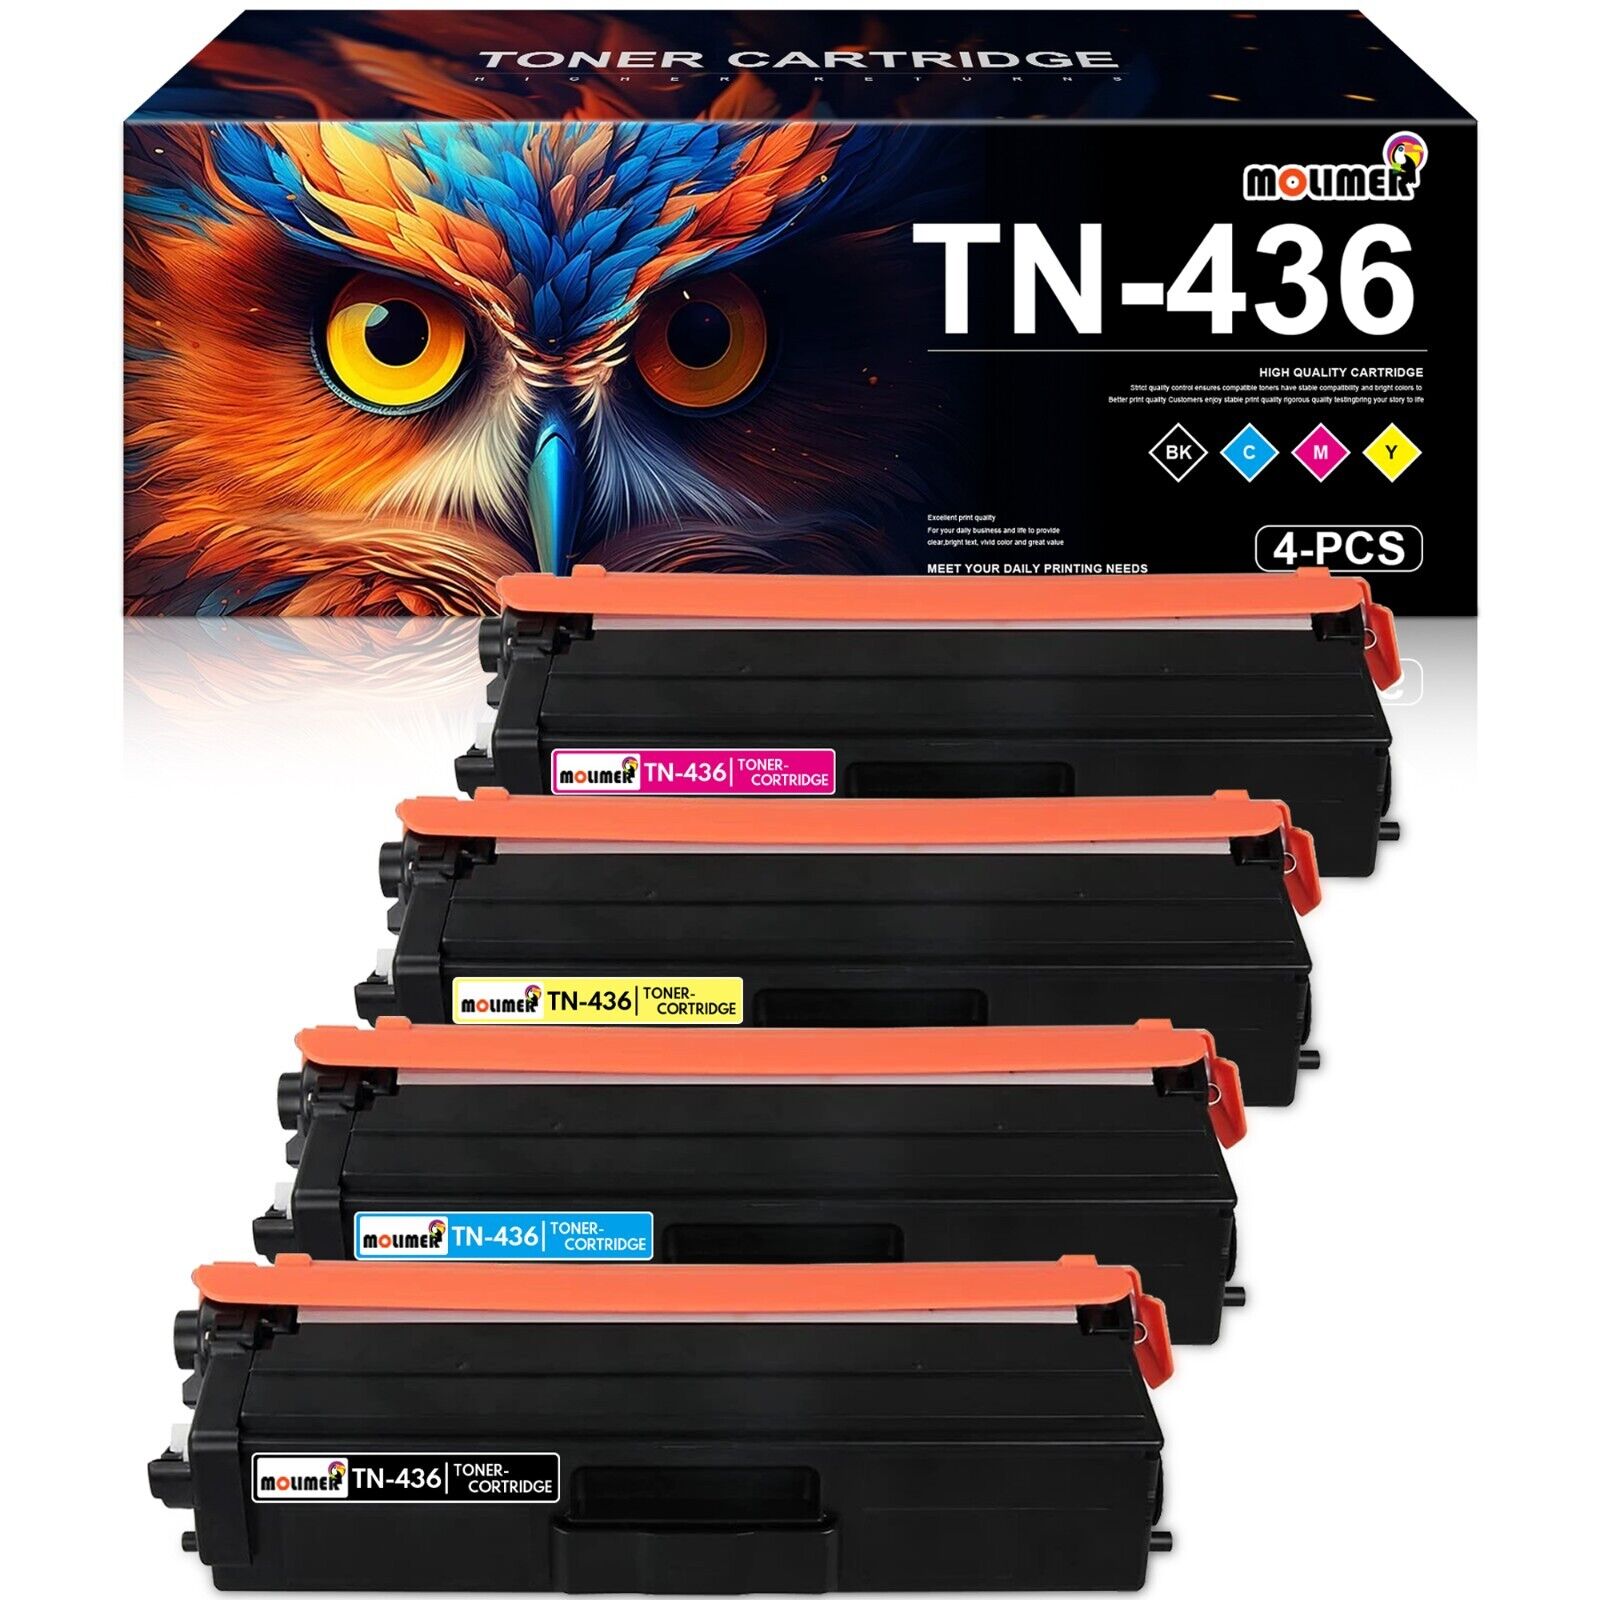 TN-436 Toner High Yield Replacement for Brother TN436 HL-L8360CDW (1BK/1C/1Y/1M)